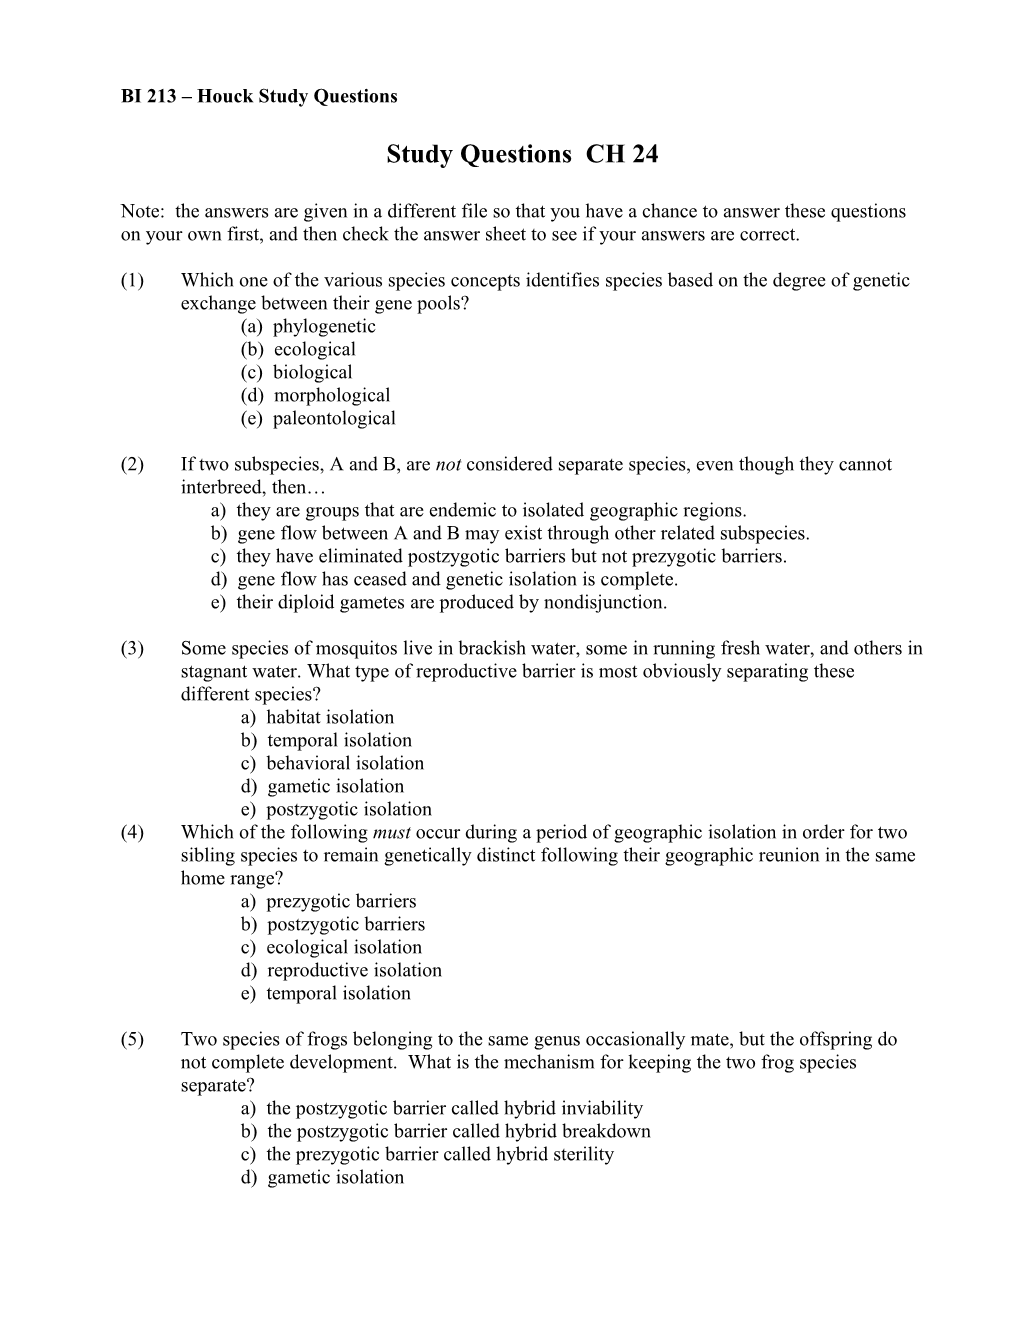 Study Questions CH 24